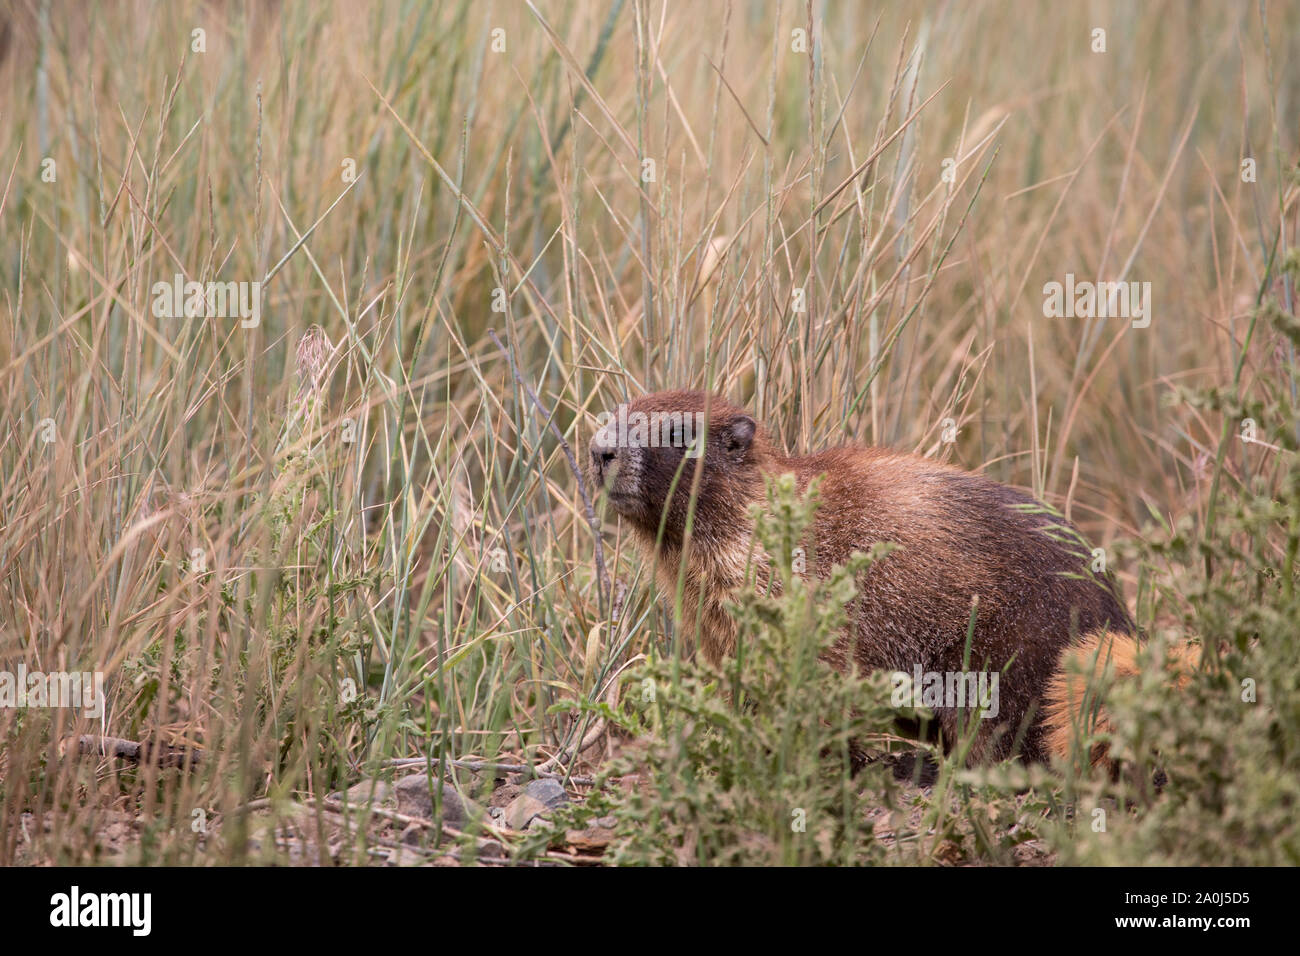 A marmot peers out from brush in Southwest Colorado. Stock Photo